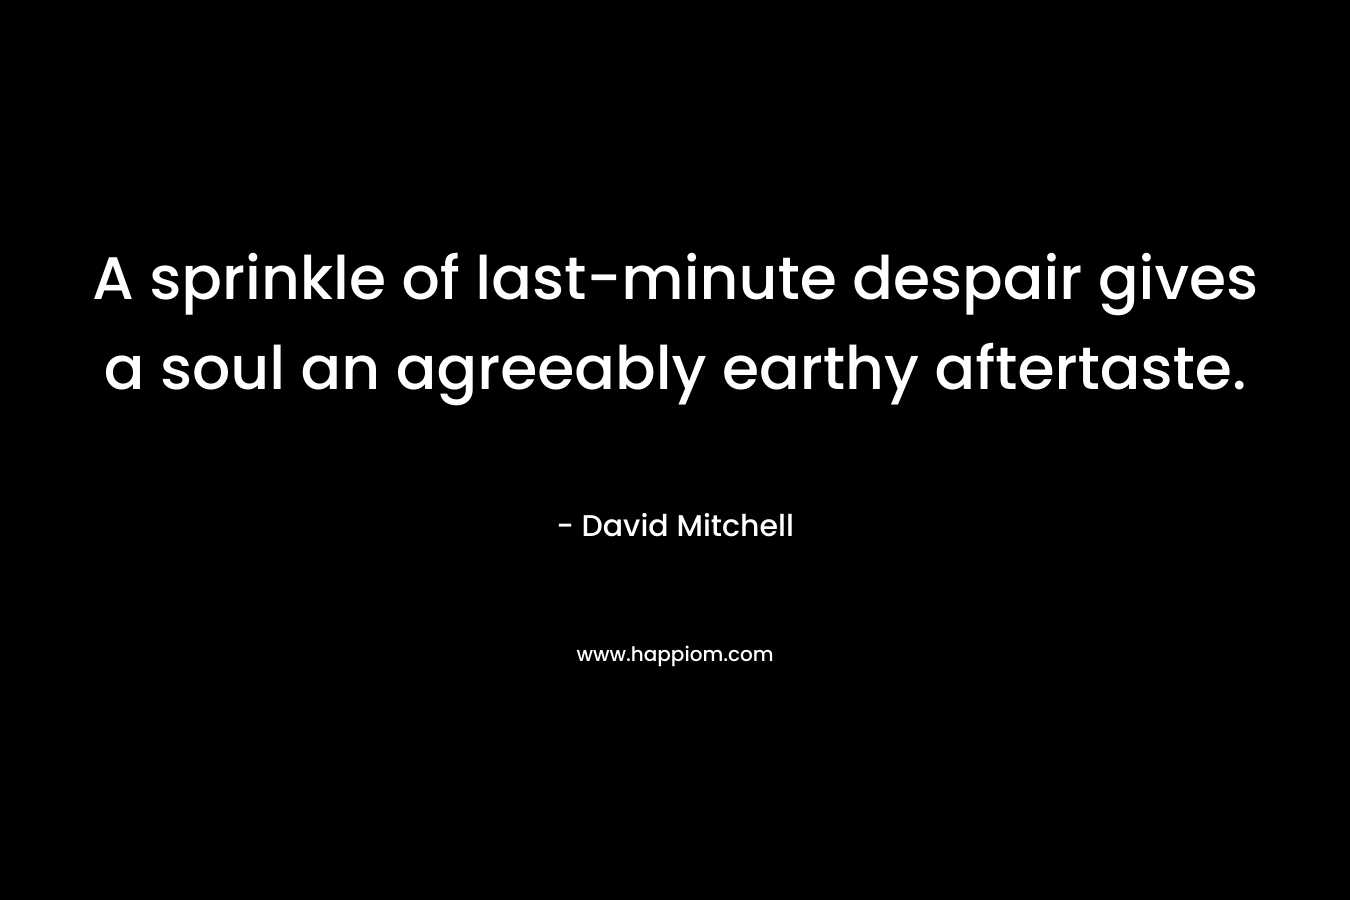 A sprinkle of last-minute despair gives a soul an agreeably earthy aftertaste. – David Mitchell